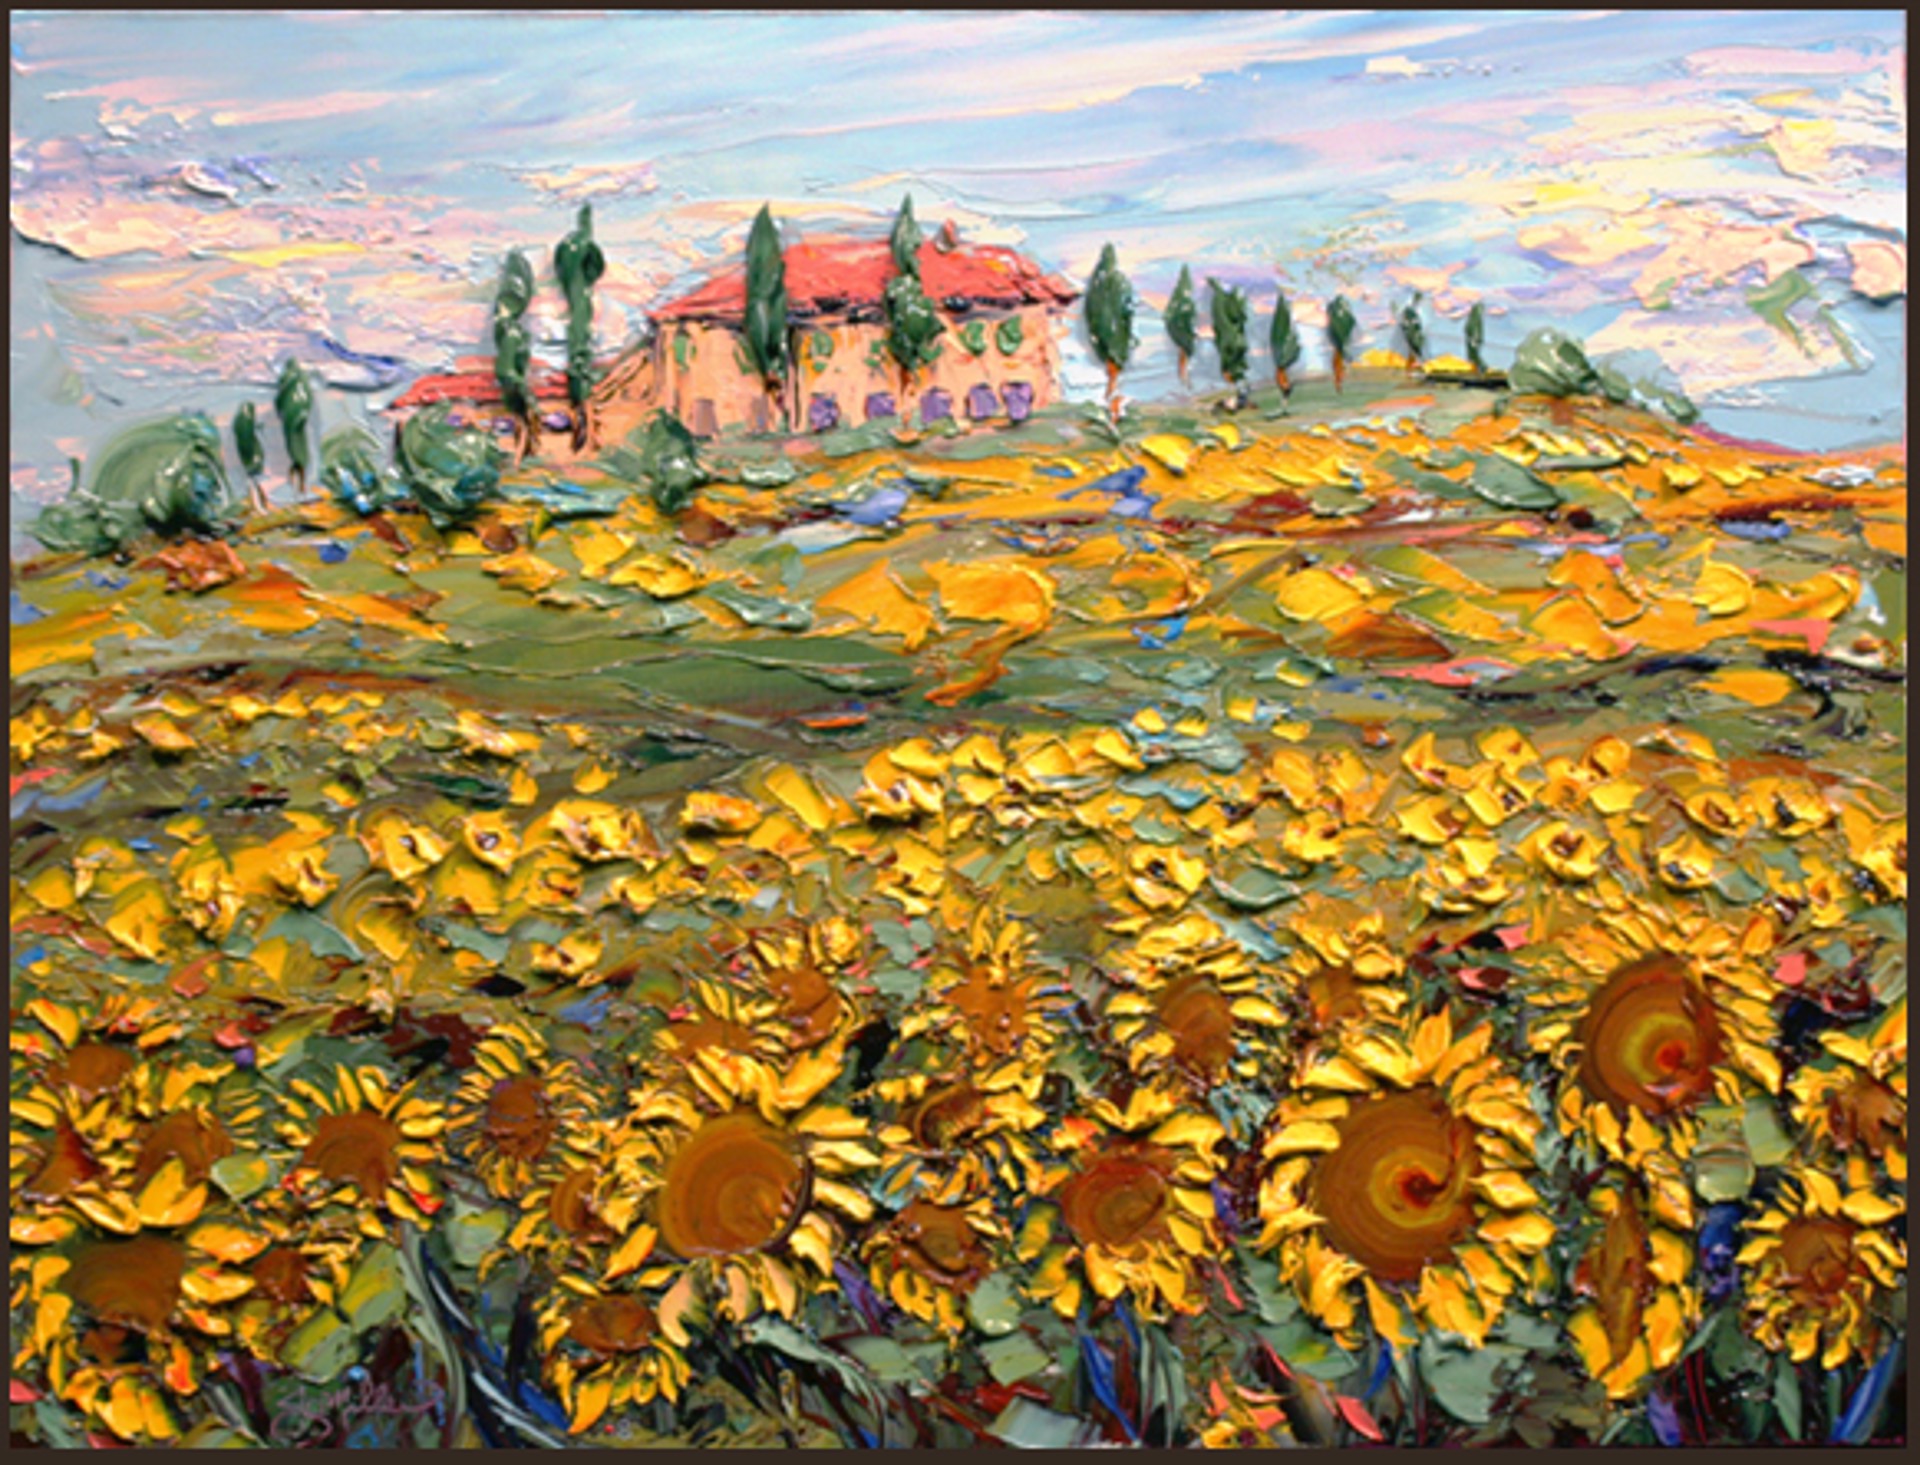 Patrick's Sunflowers by JD Miller